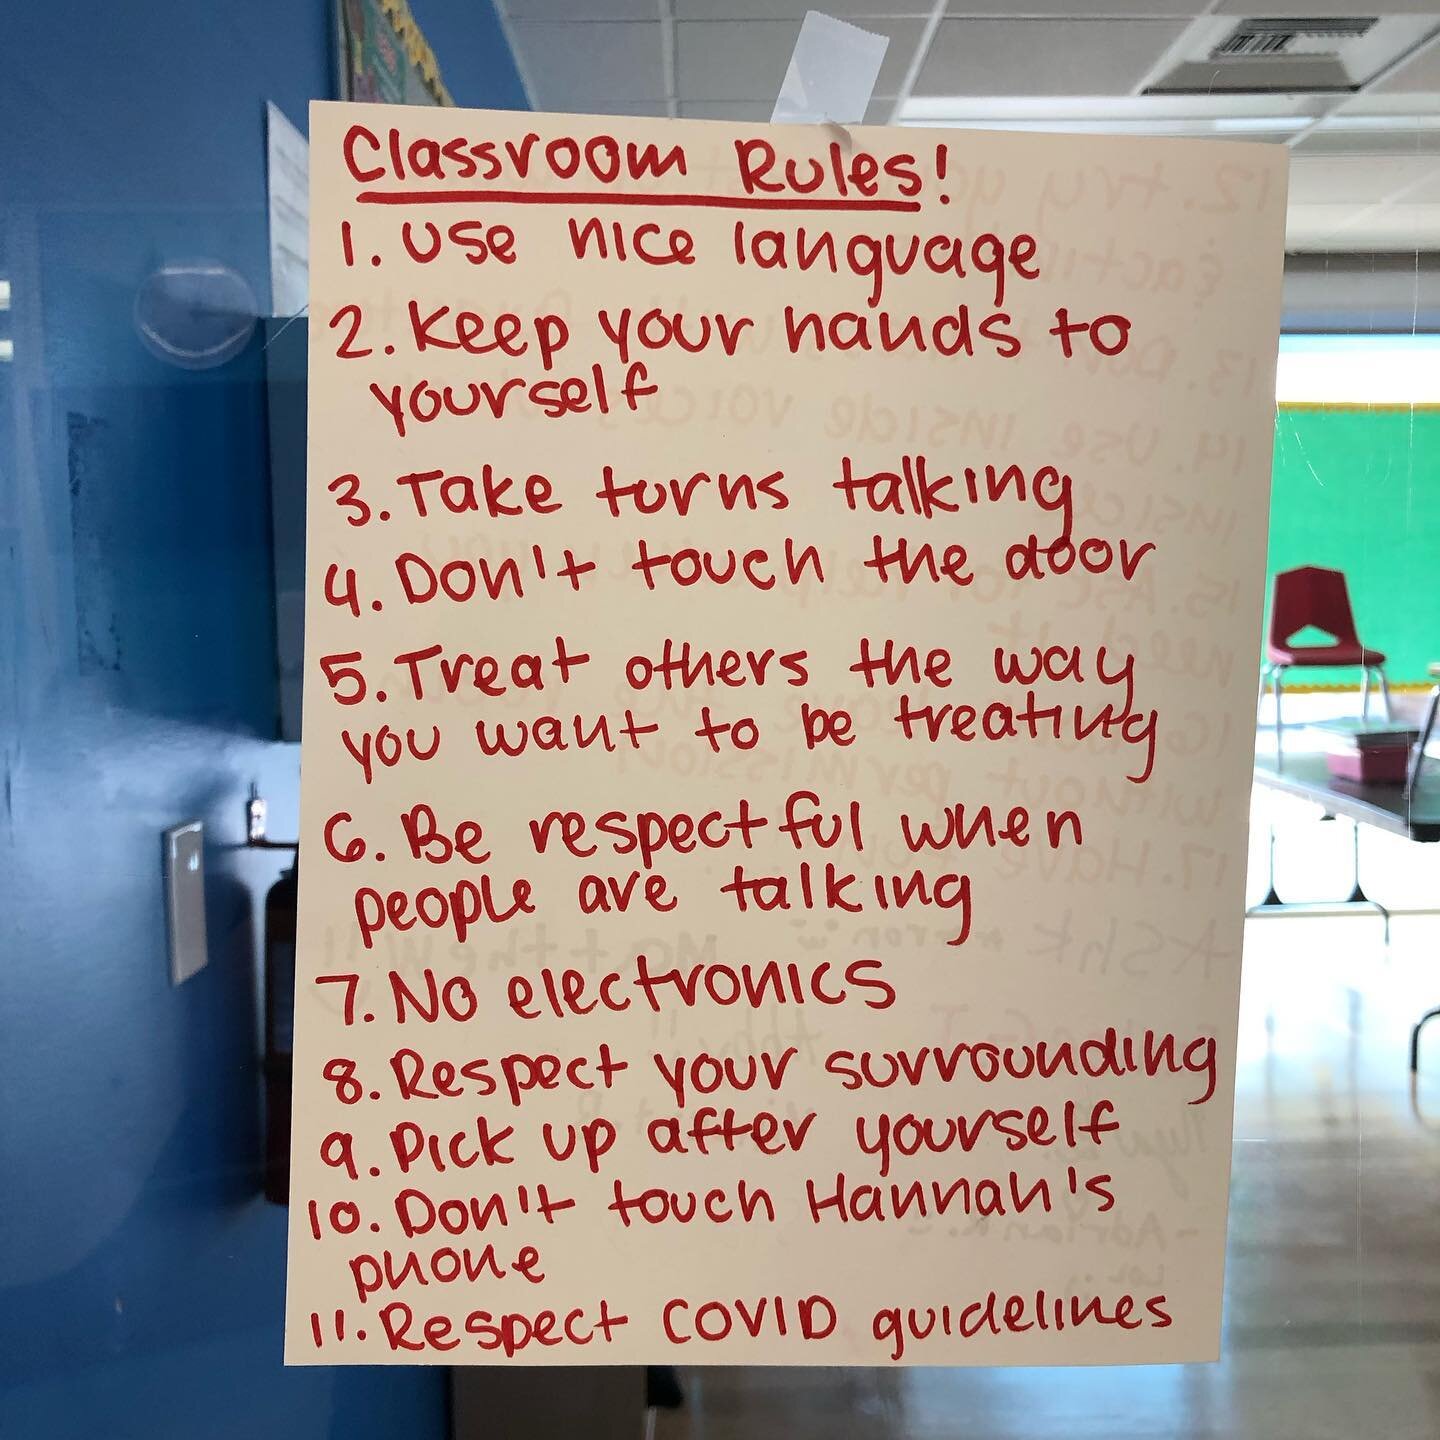 Not sure about #1 and #4 but you have to admire Hannah&rsquo;s boundary setting.  #eastvalleyymca #rules #helpfulreminders #bossypants